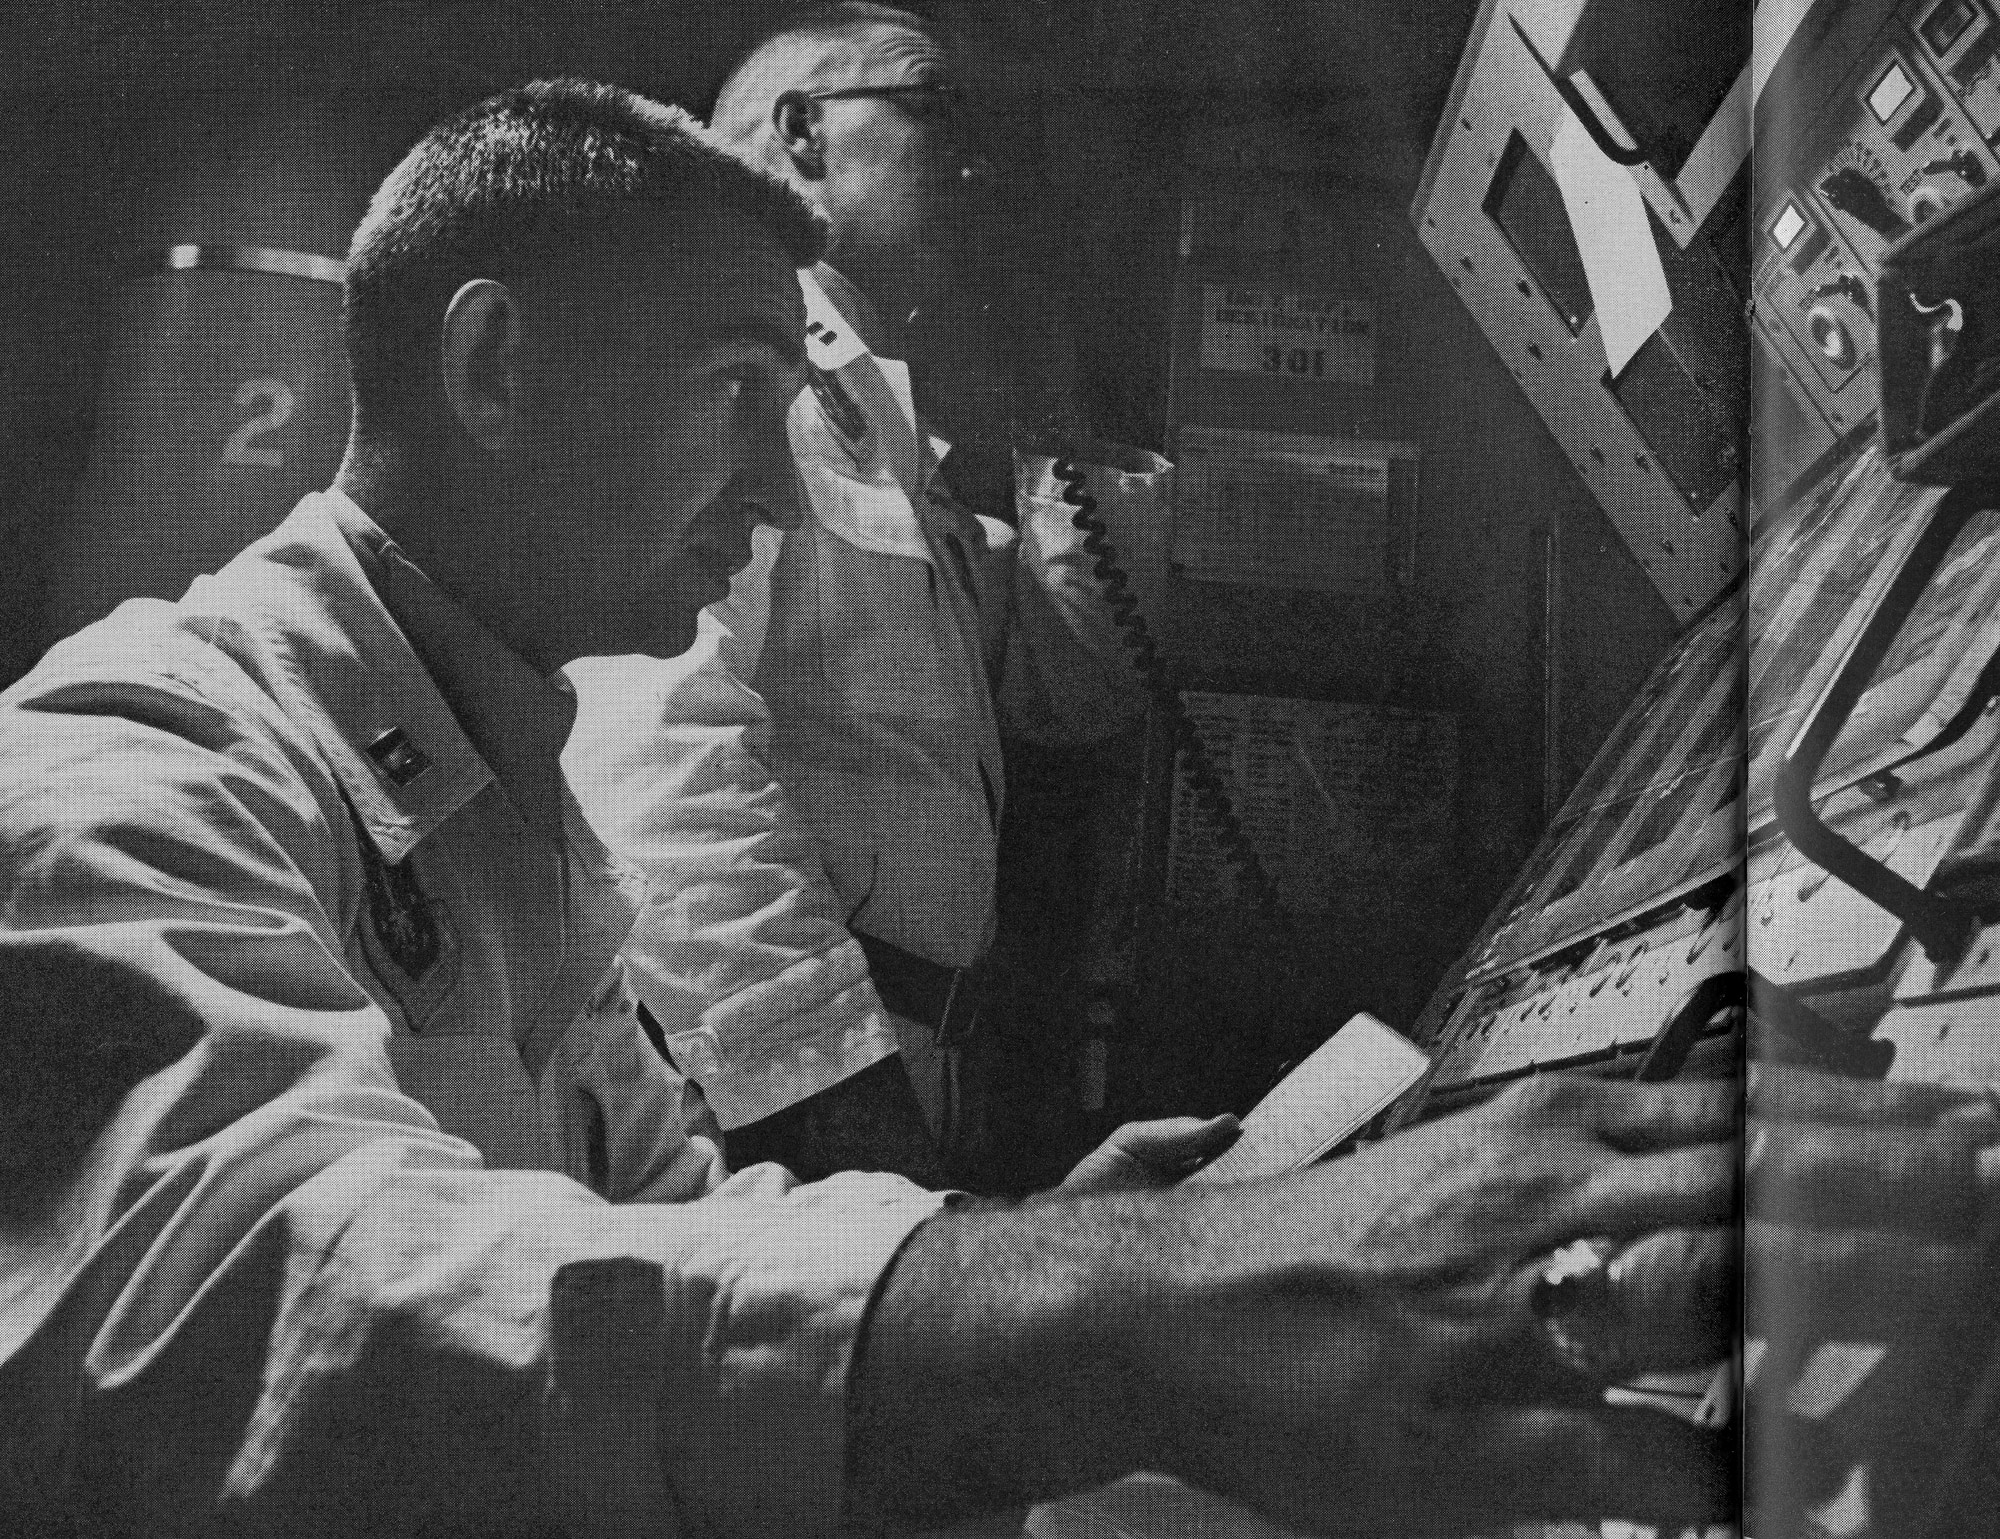 MISSILE COMPLEX, S.D. -- In this photo from November 1964, Captains Allen Lamb and Bill Christians,  communicate with members of the their squadron while on duty at a launch control center. For five decades now, the Intercontinental Ballistic Missile has served and continues to stand as a safe, secure and effective strategic deterrence for years to come. (LIFE photo/Bill Ray)